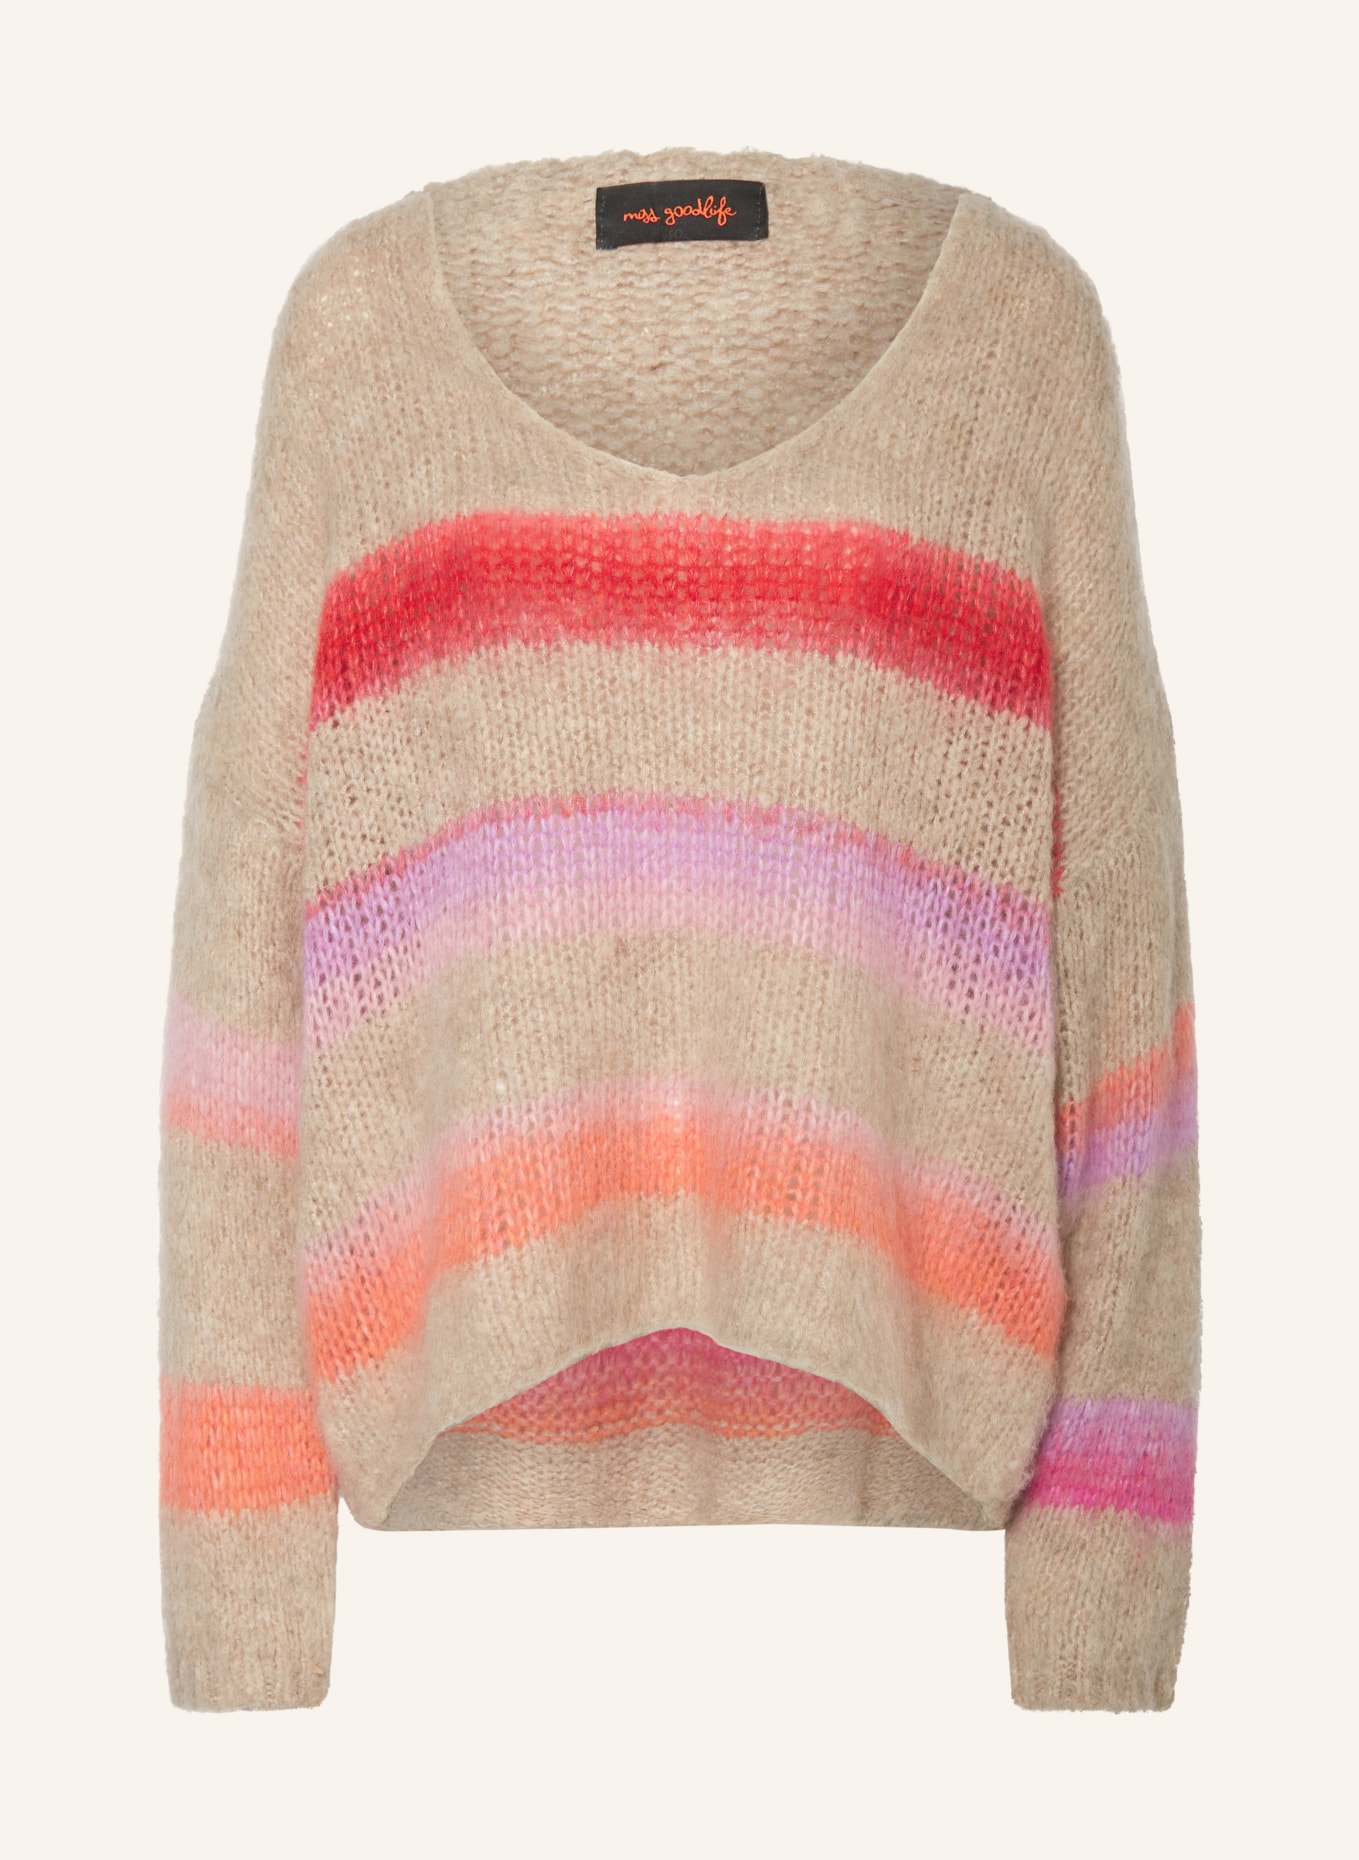 miss goodlife Pullover mit Mohair, Farbe: TAUPE/ ROT/ PINK (Bild 1)